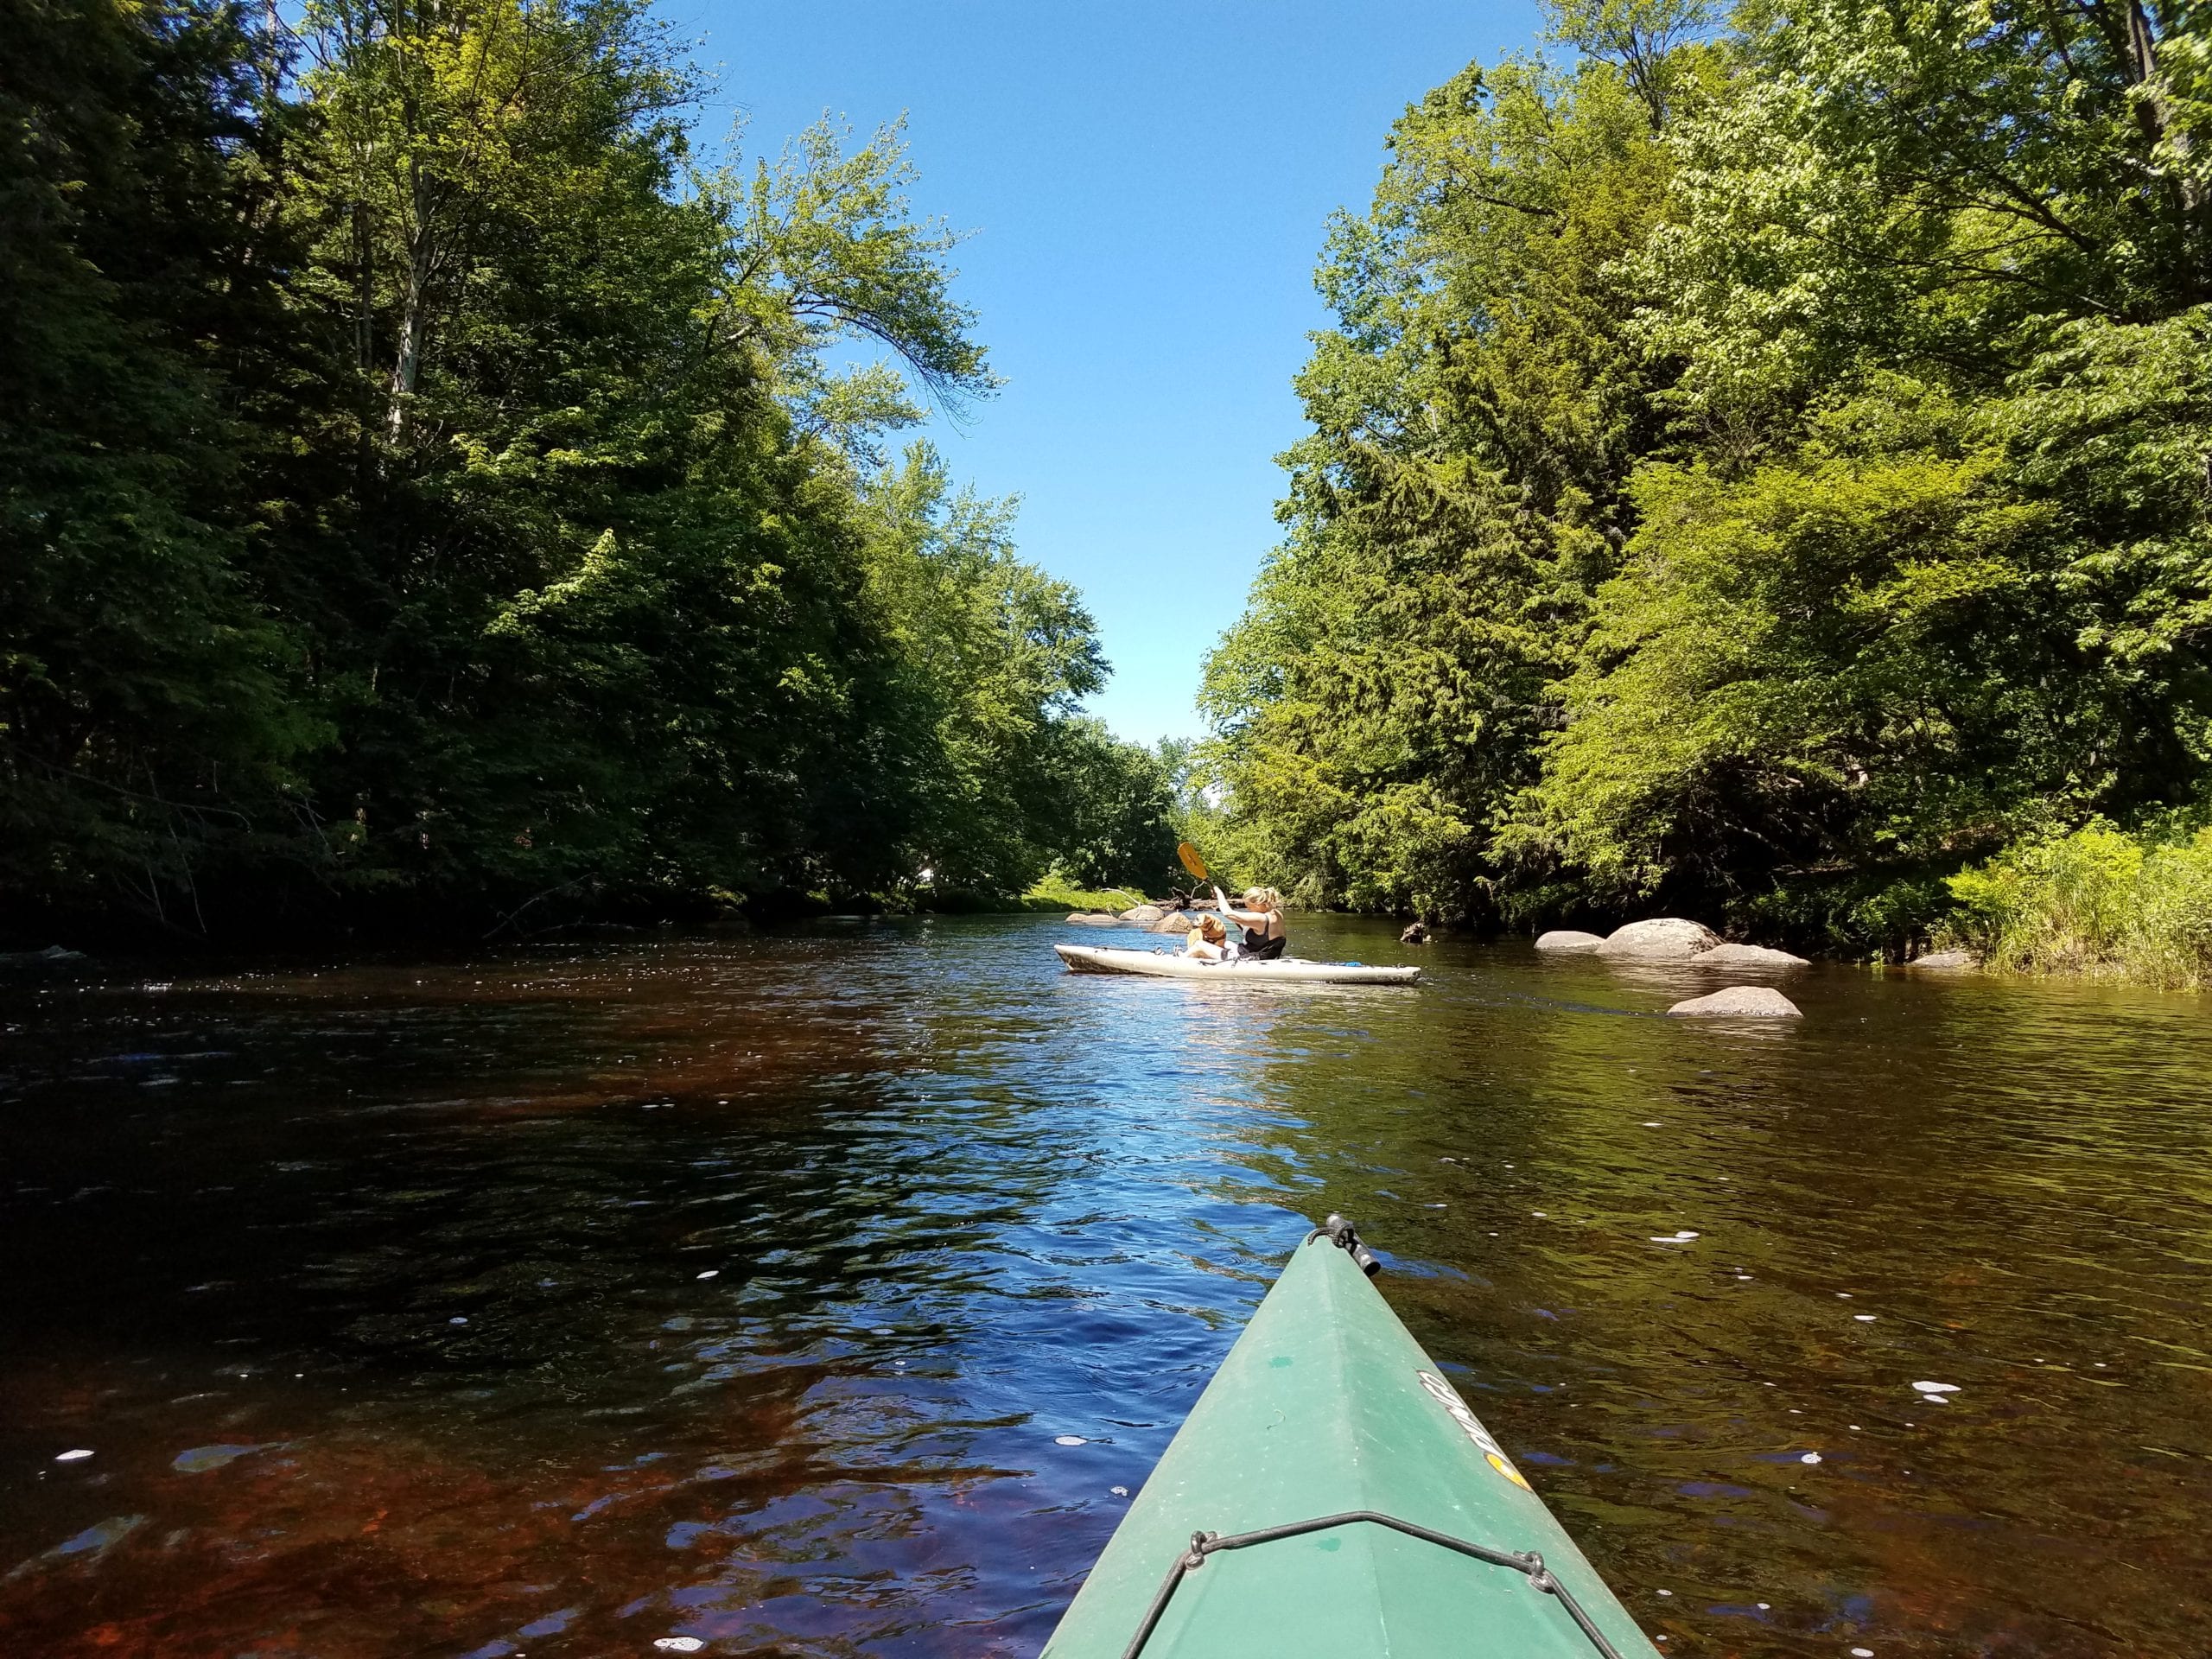 The tip of a kayak is visible at the bottom of the image on a river. Ahead is another person kayaking with green trees on each side.